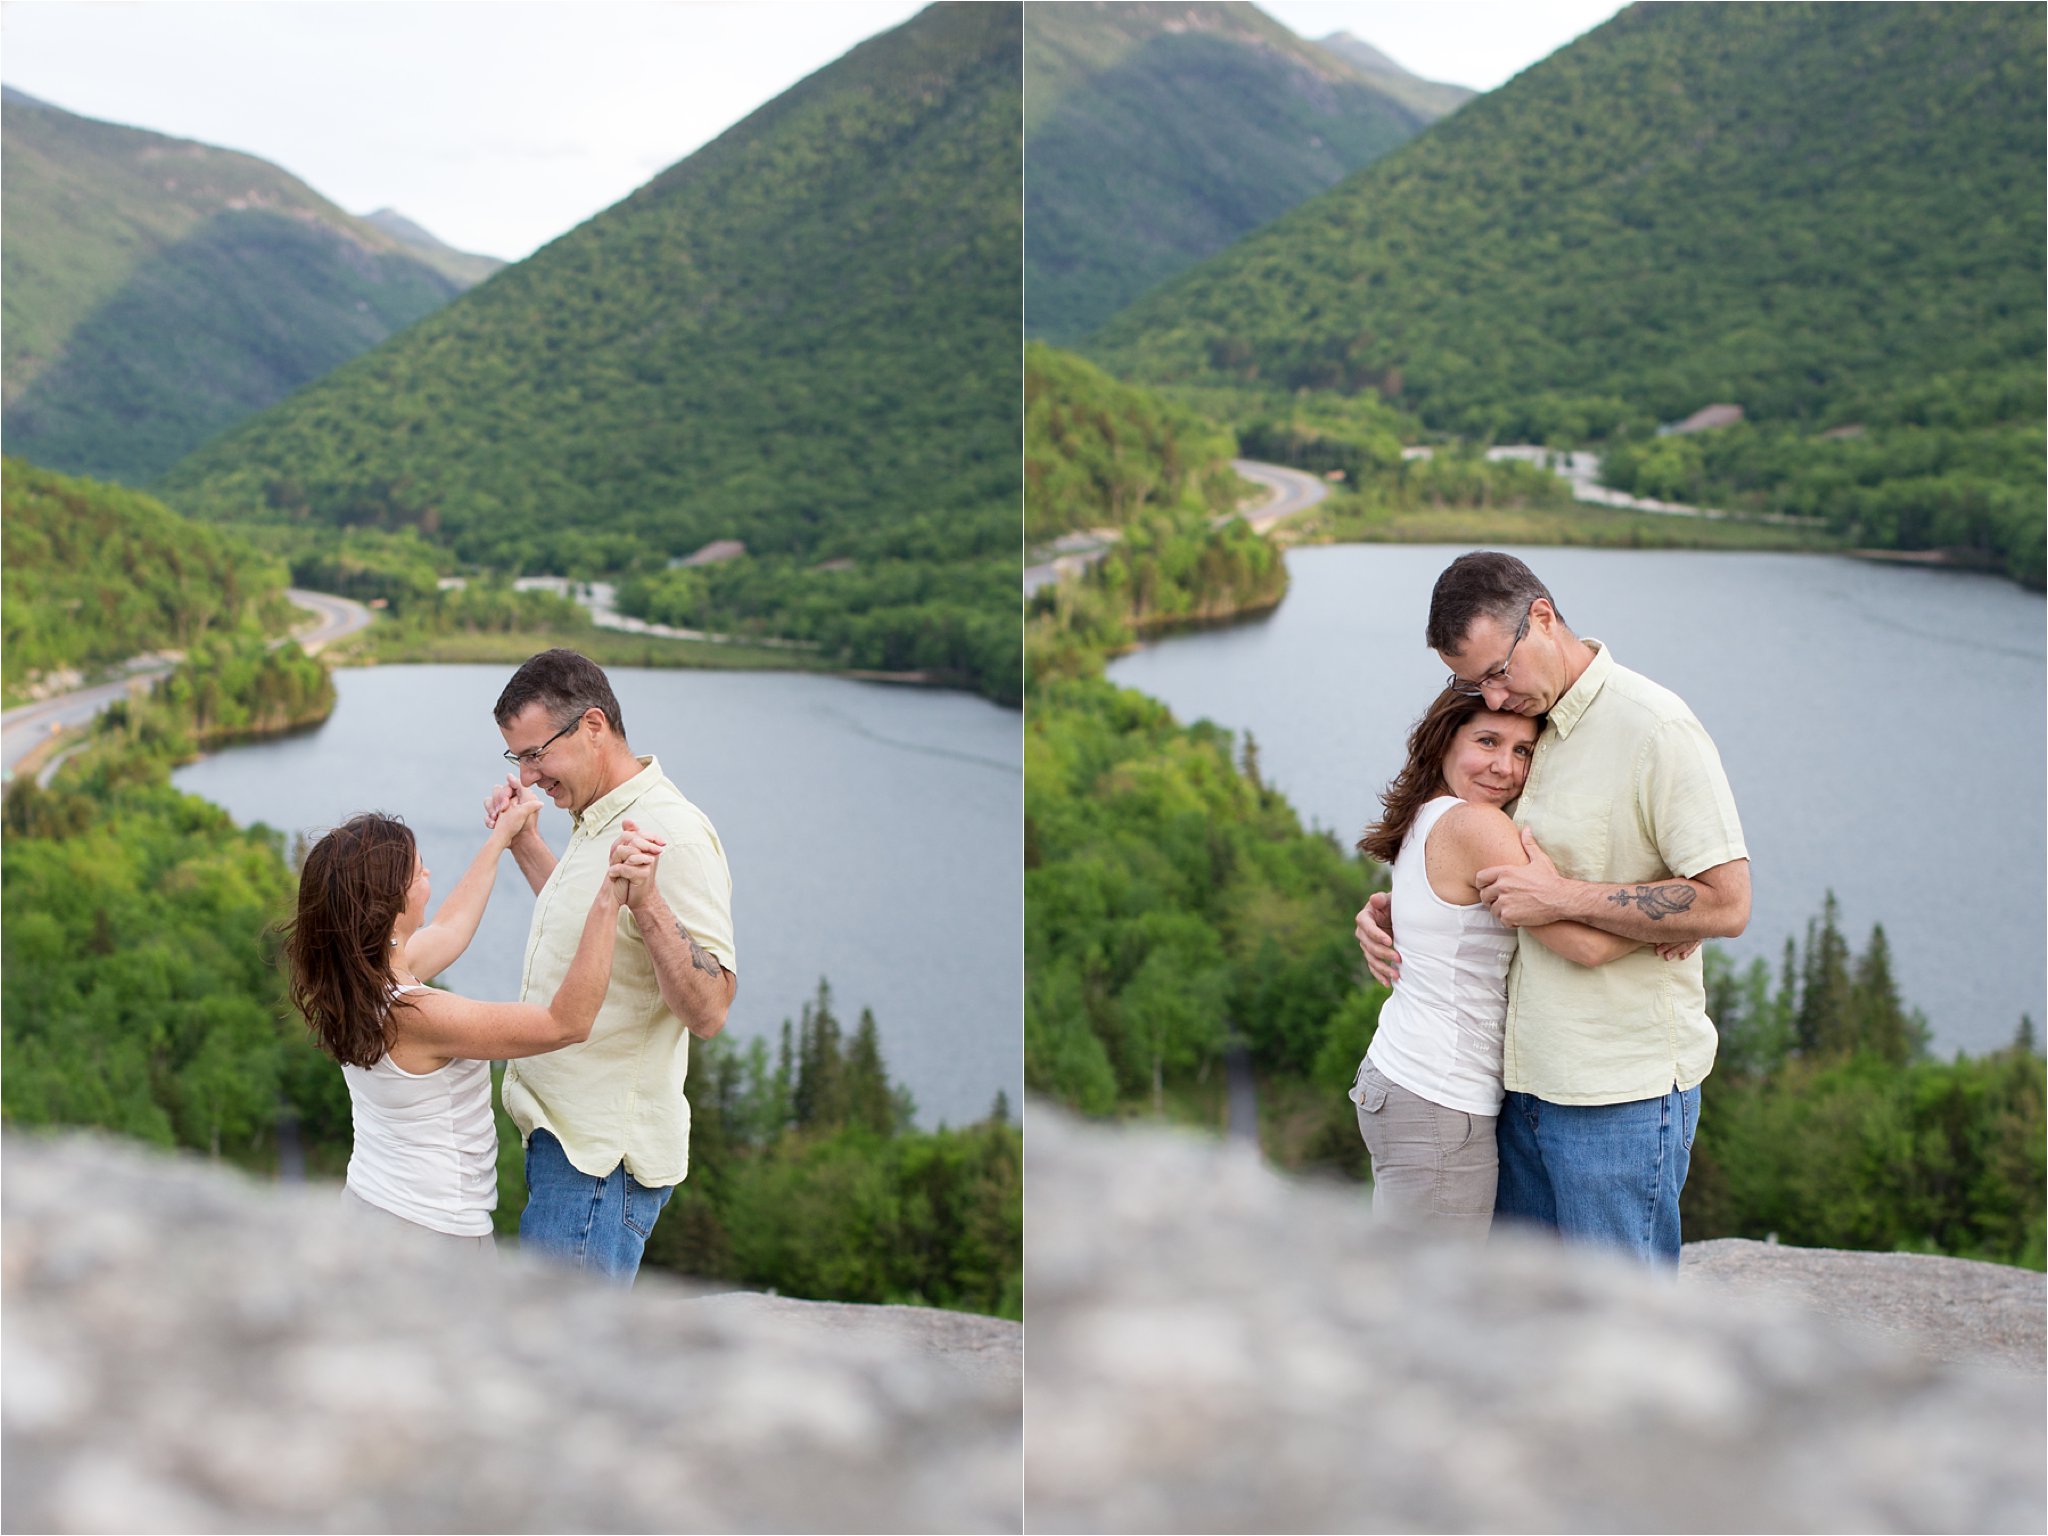 A Playful Engaged Couple on Artist's Bluff, Franconia Notch